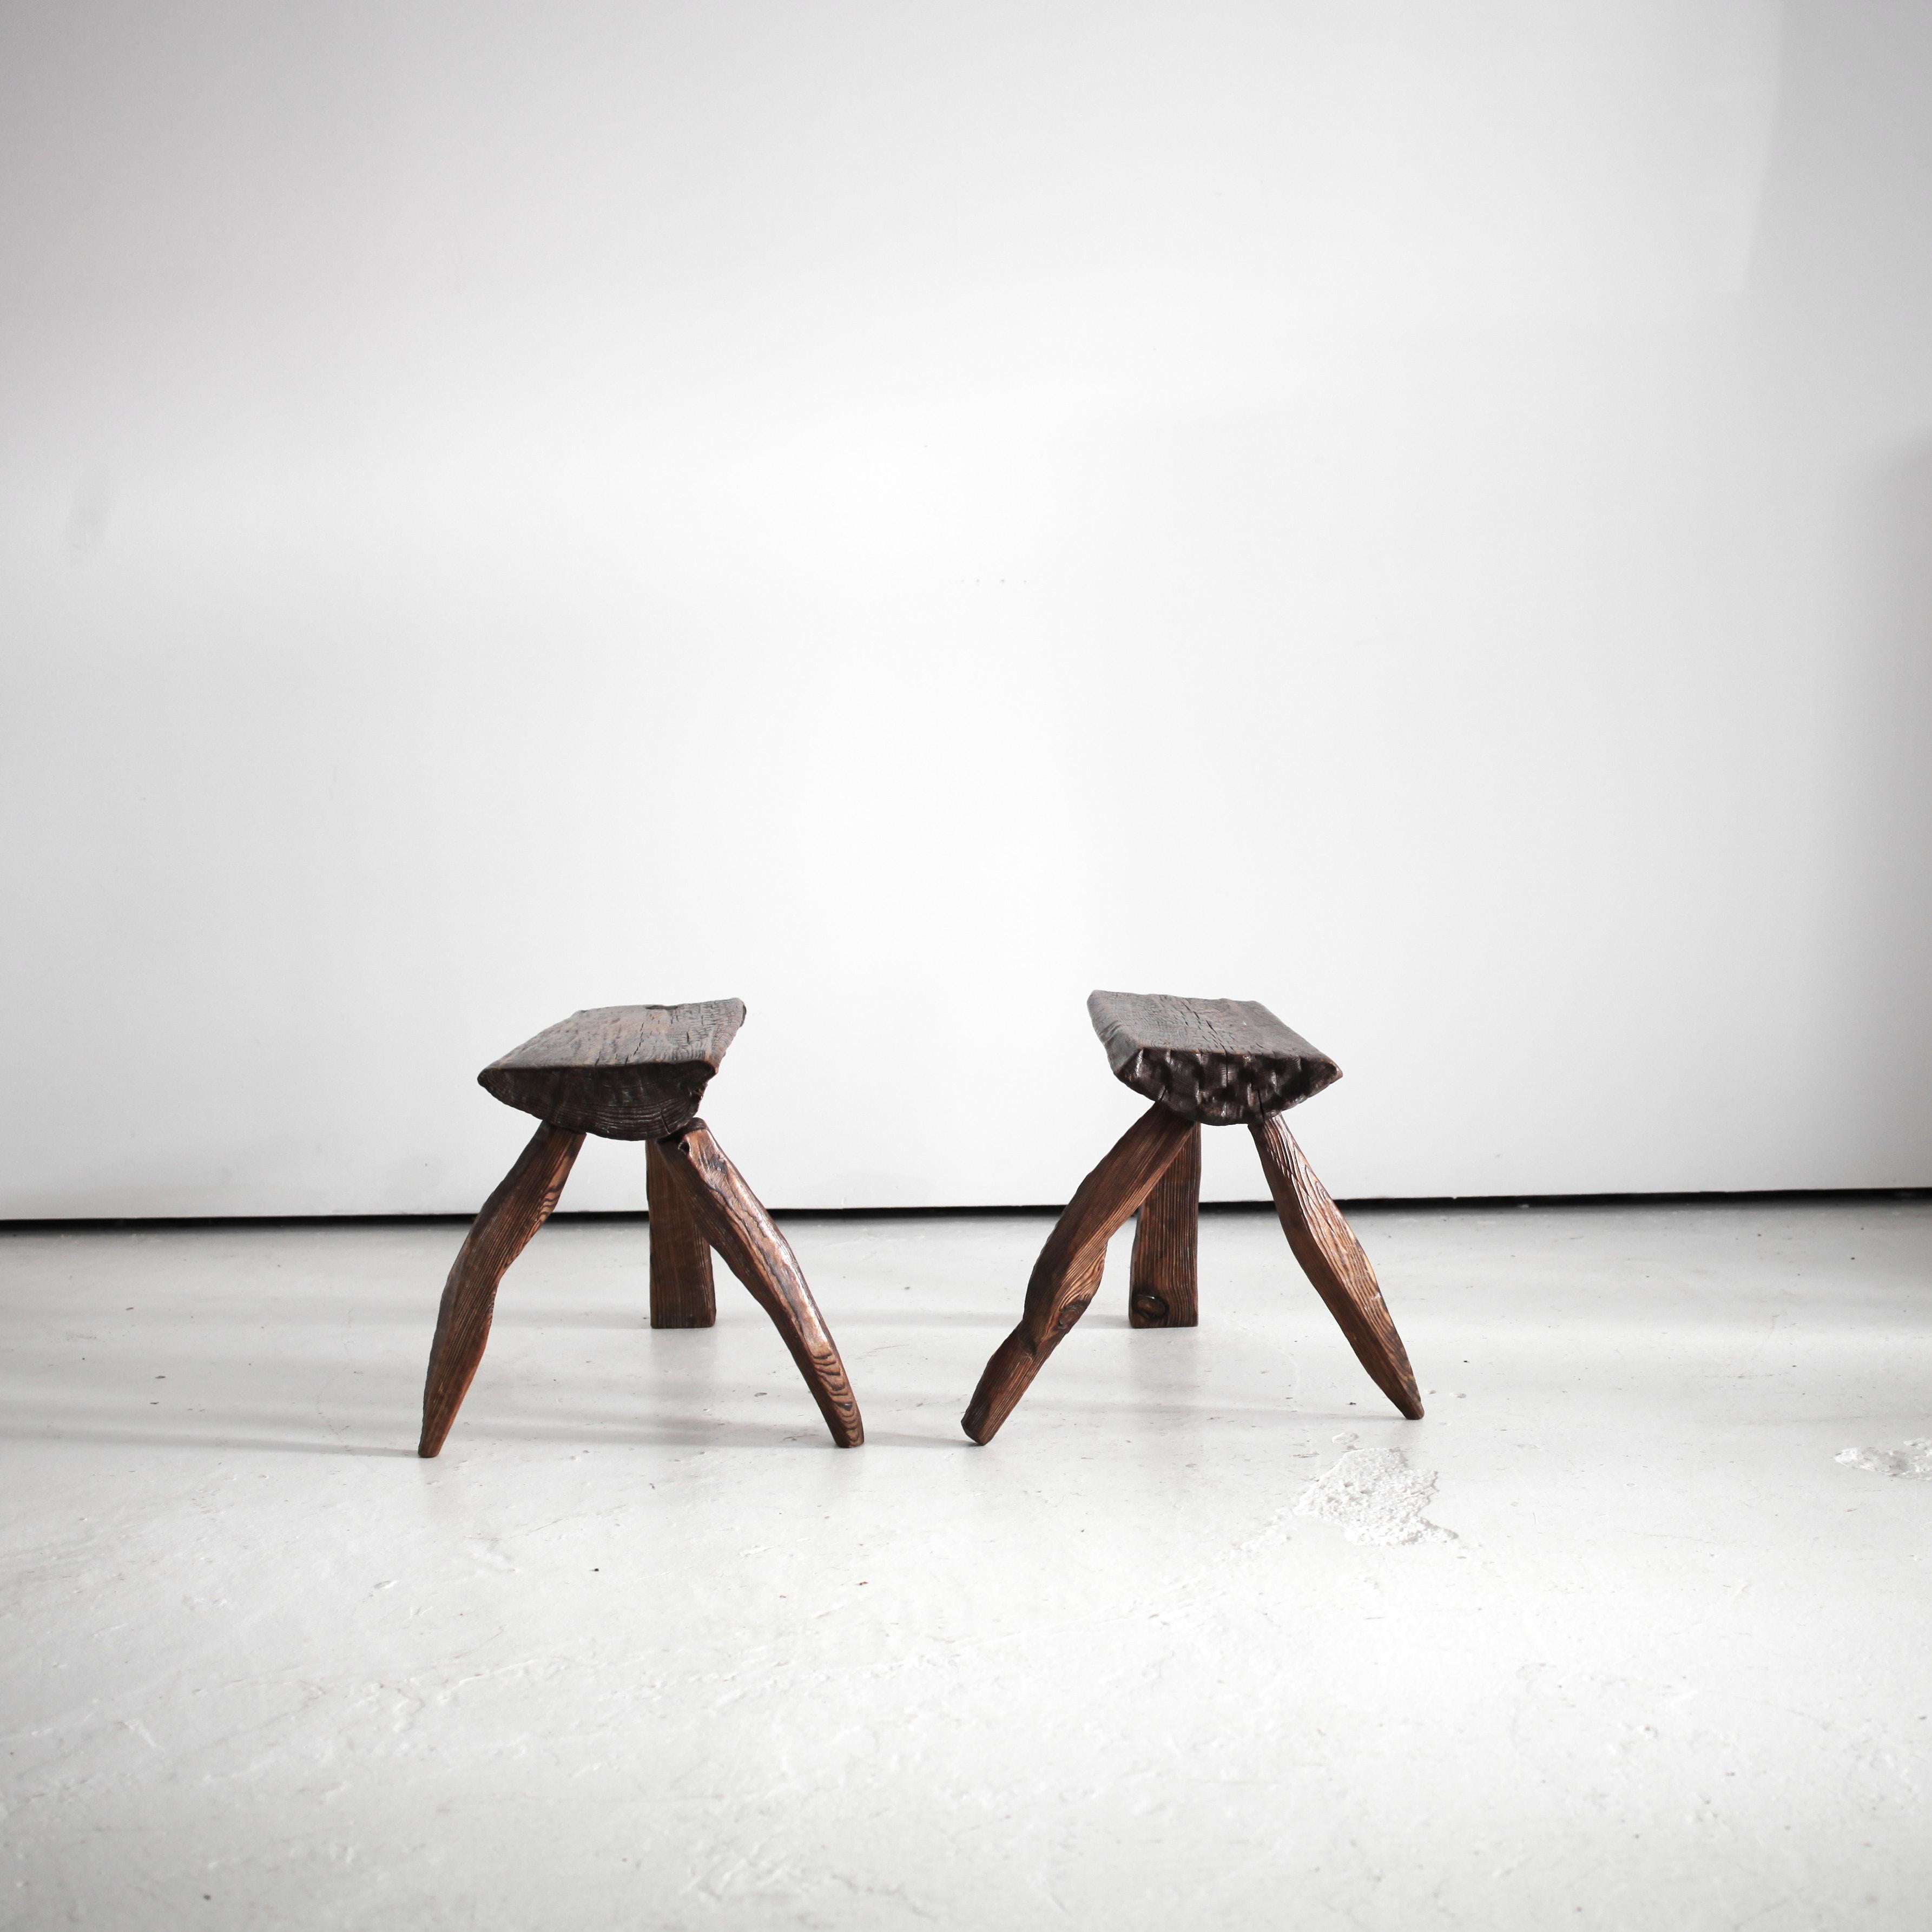 A Pair of pine artist made stools from Warsaw.

Distinctly carved in the Polish brutalist style.